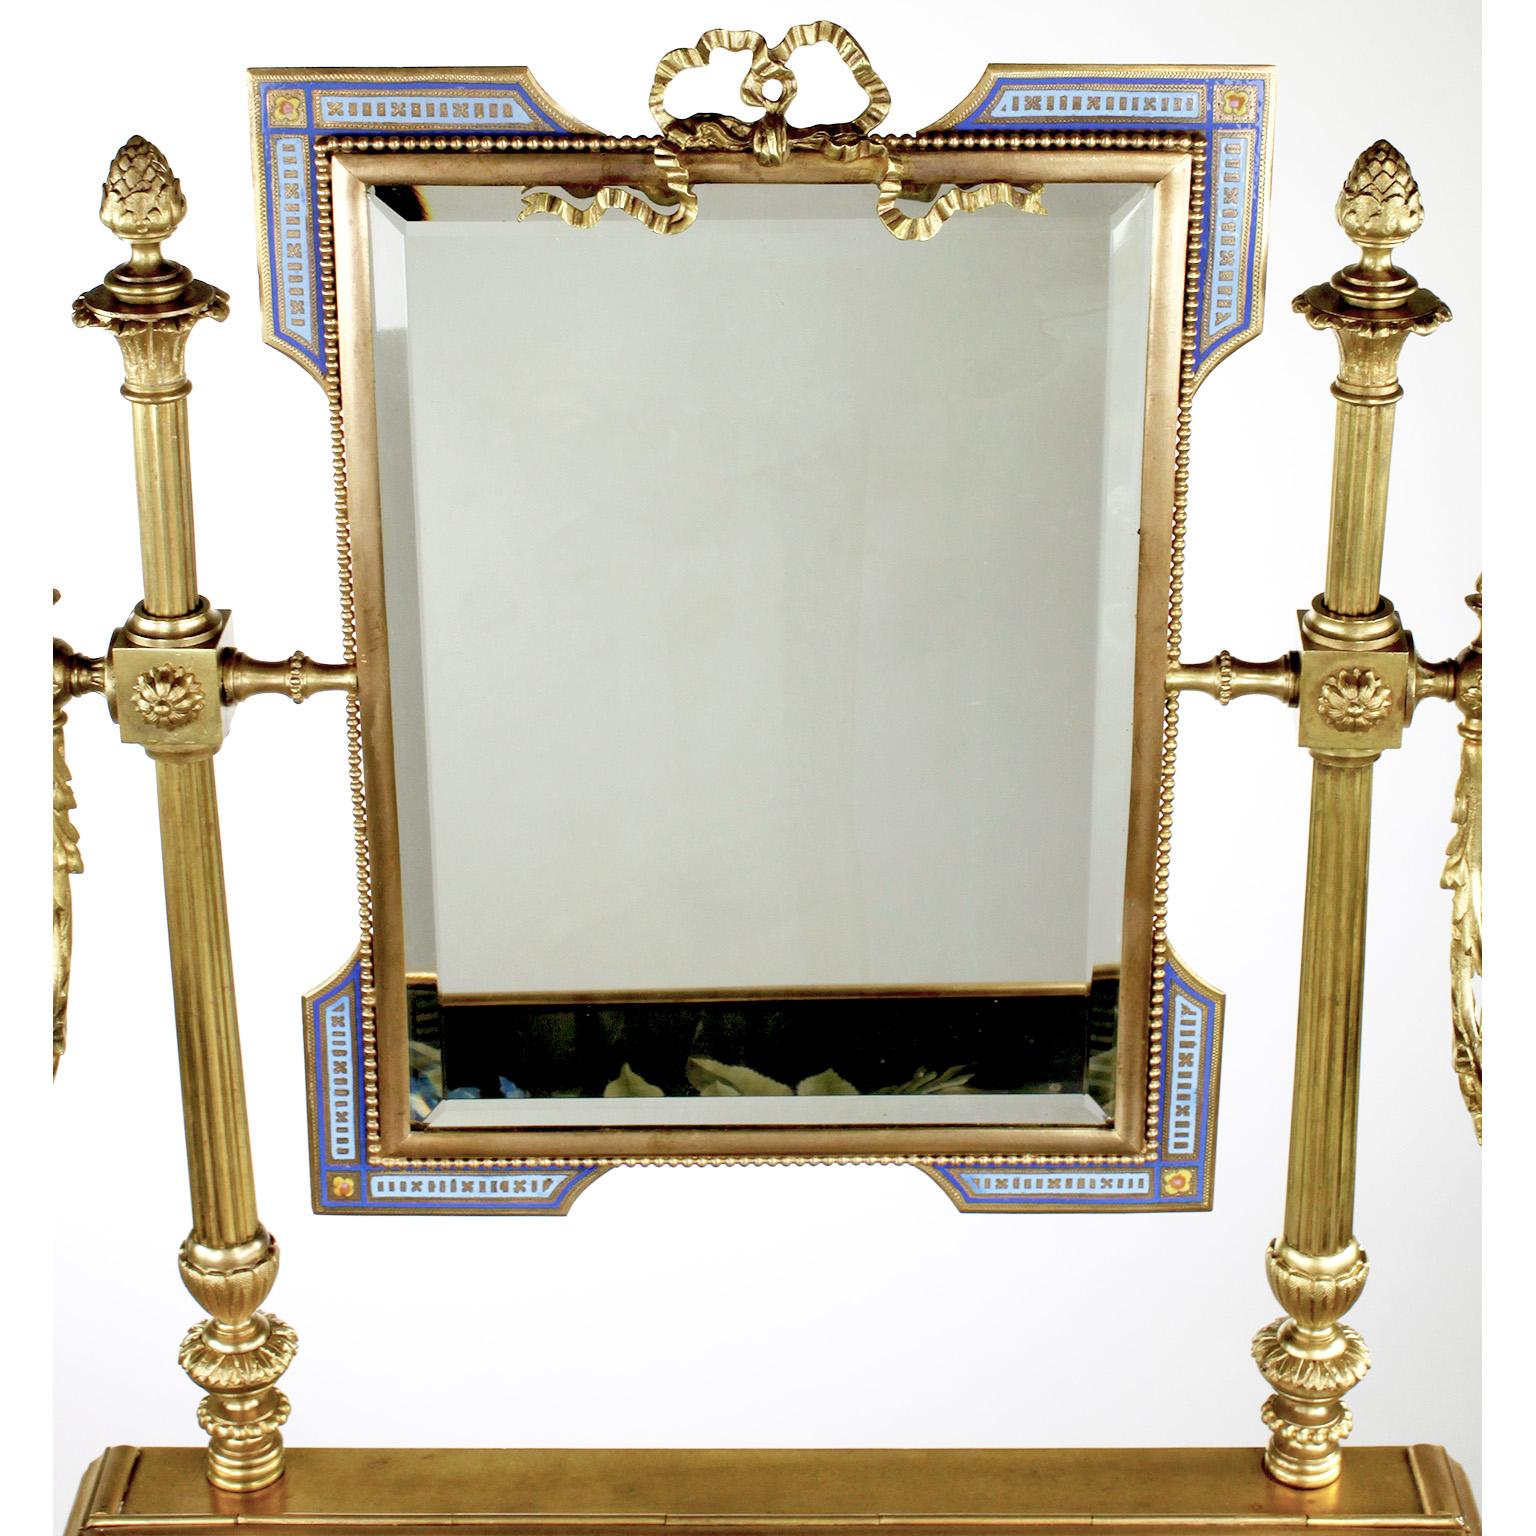 French 19th Century Gilt-Bronze and Pietra Dura Vanity Stand, Attr. Tahan, Paris For Sale 5